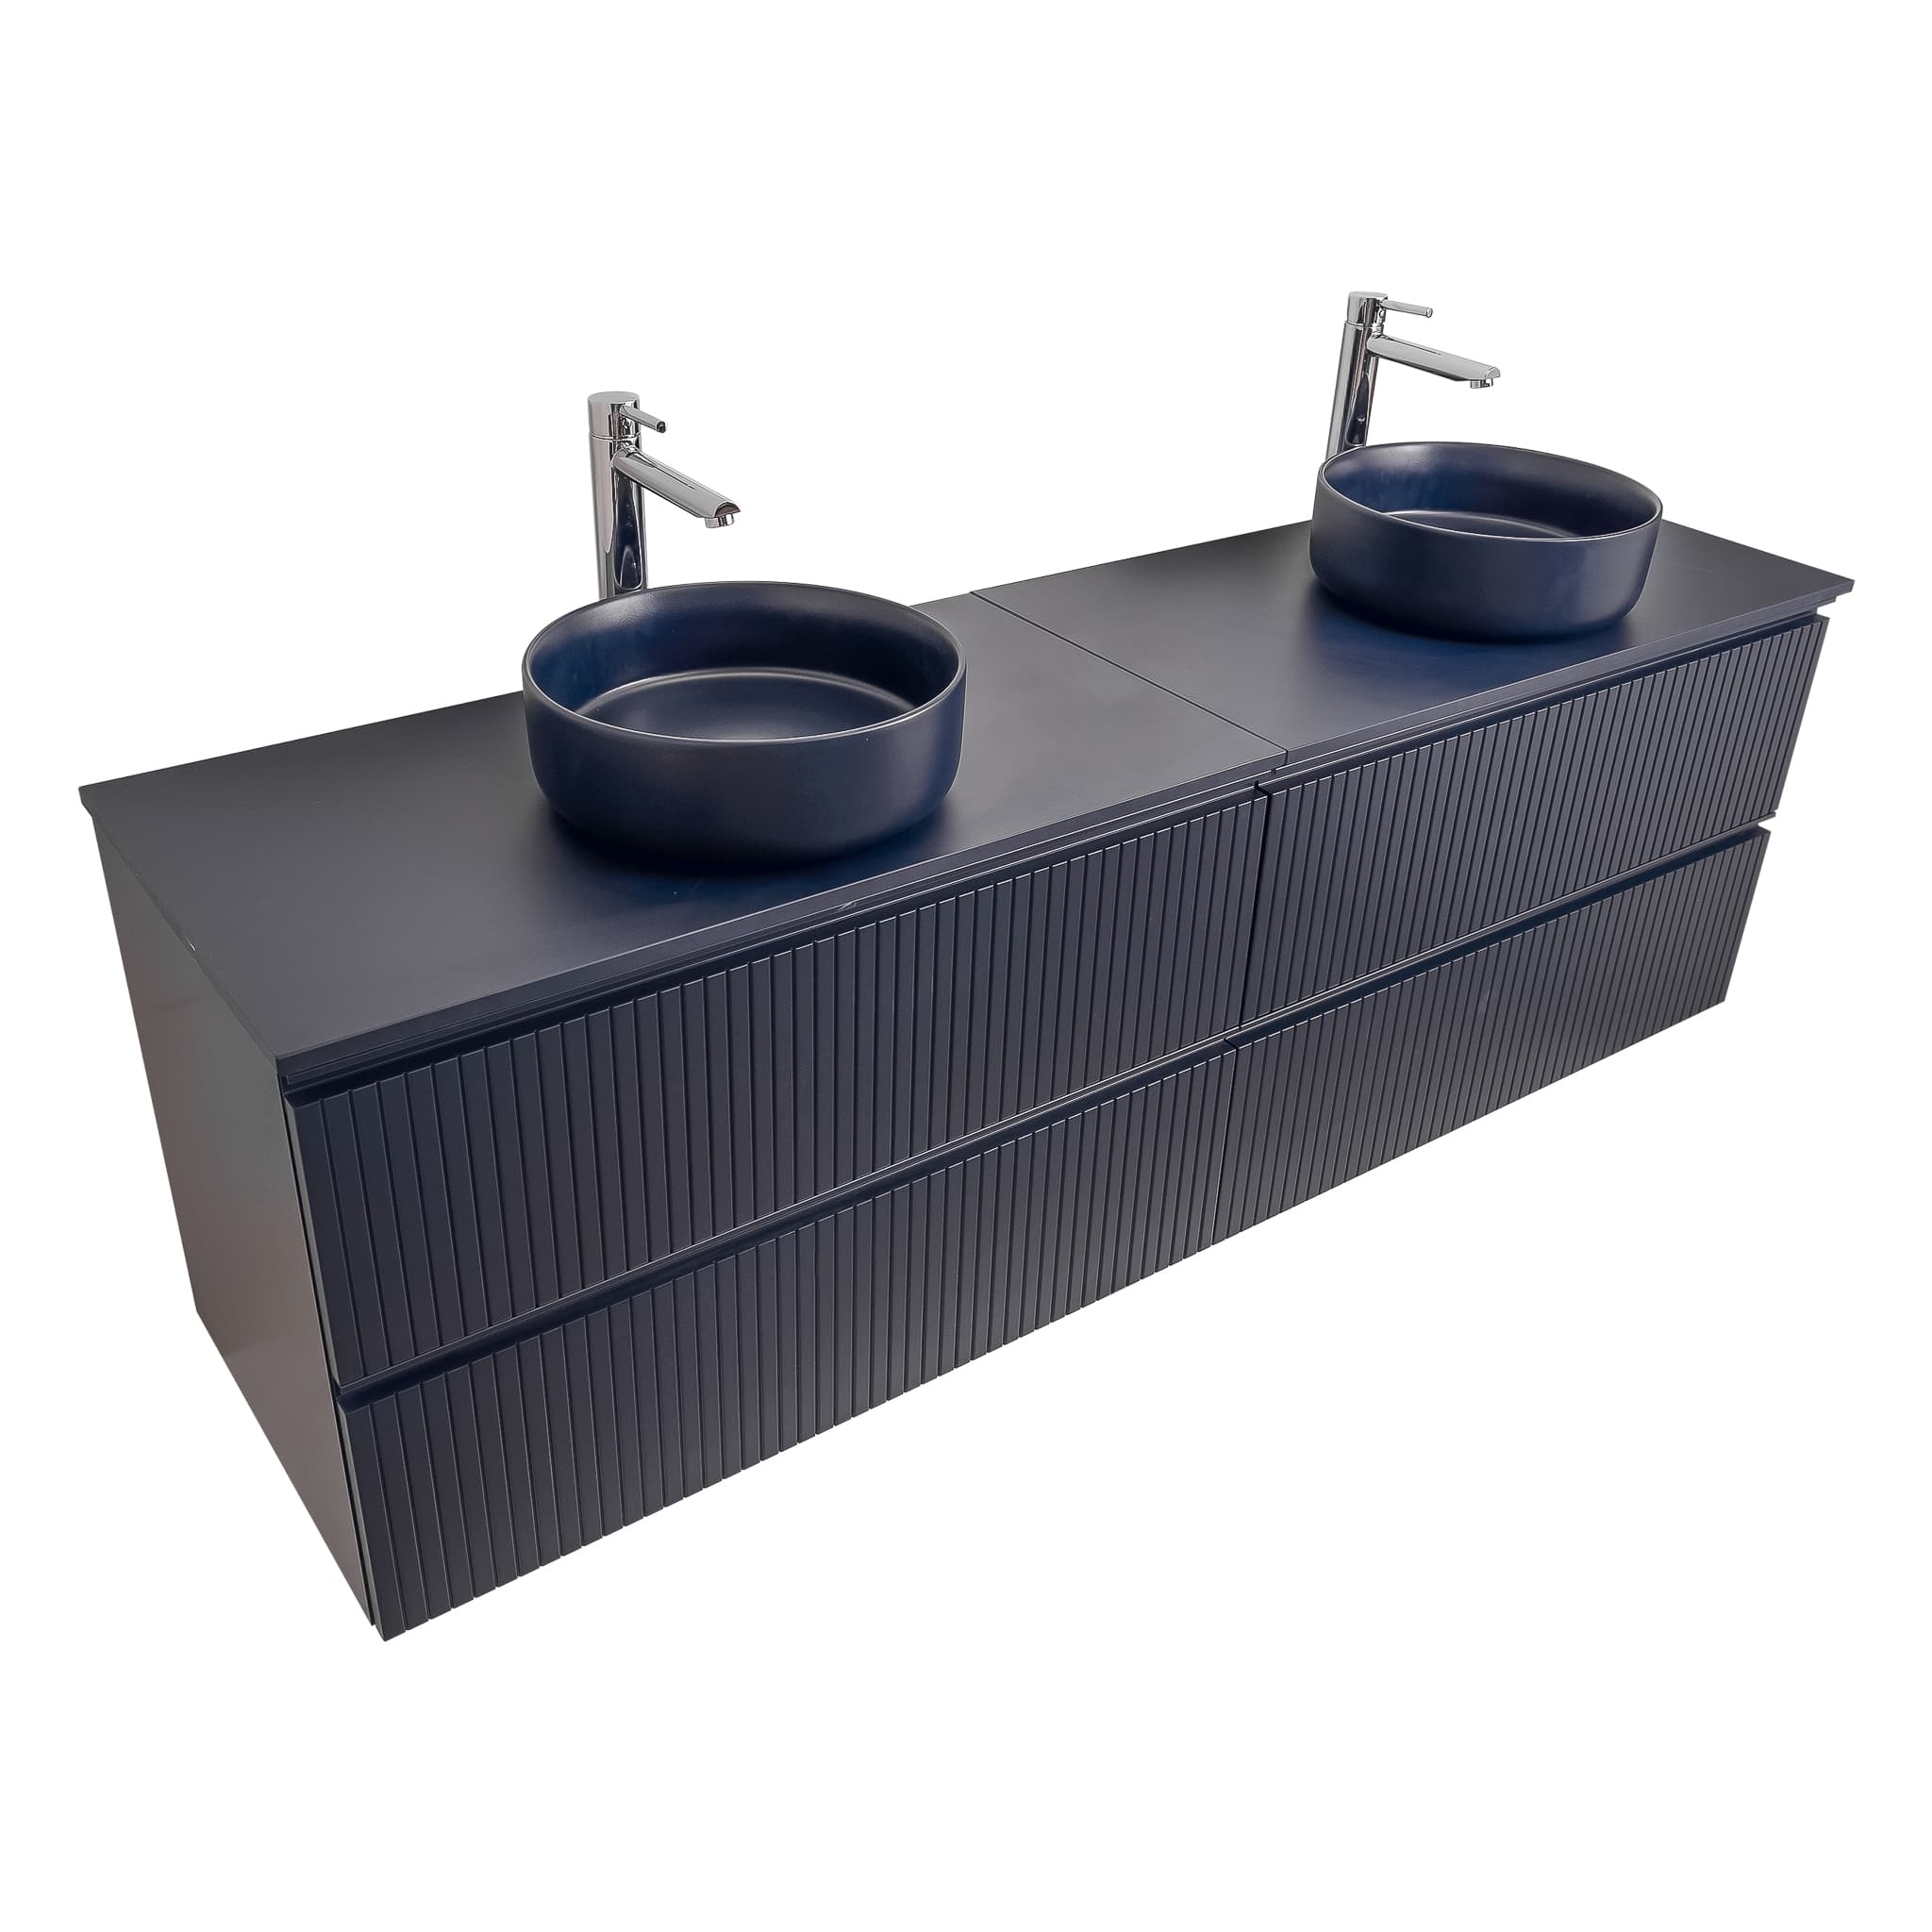 Ares 63 Matte Navy Blue Cabinet, Ares Navy Blue Top And Two Ares Navy Blue Ceramic Basin, Wall Mounted Modern Vanity Set